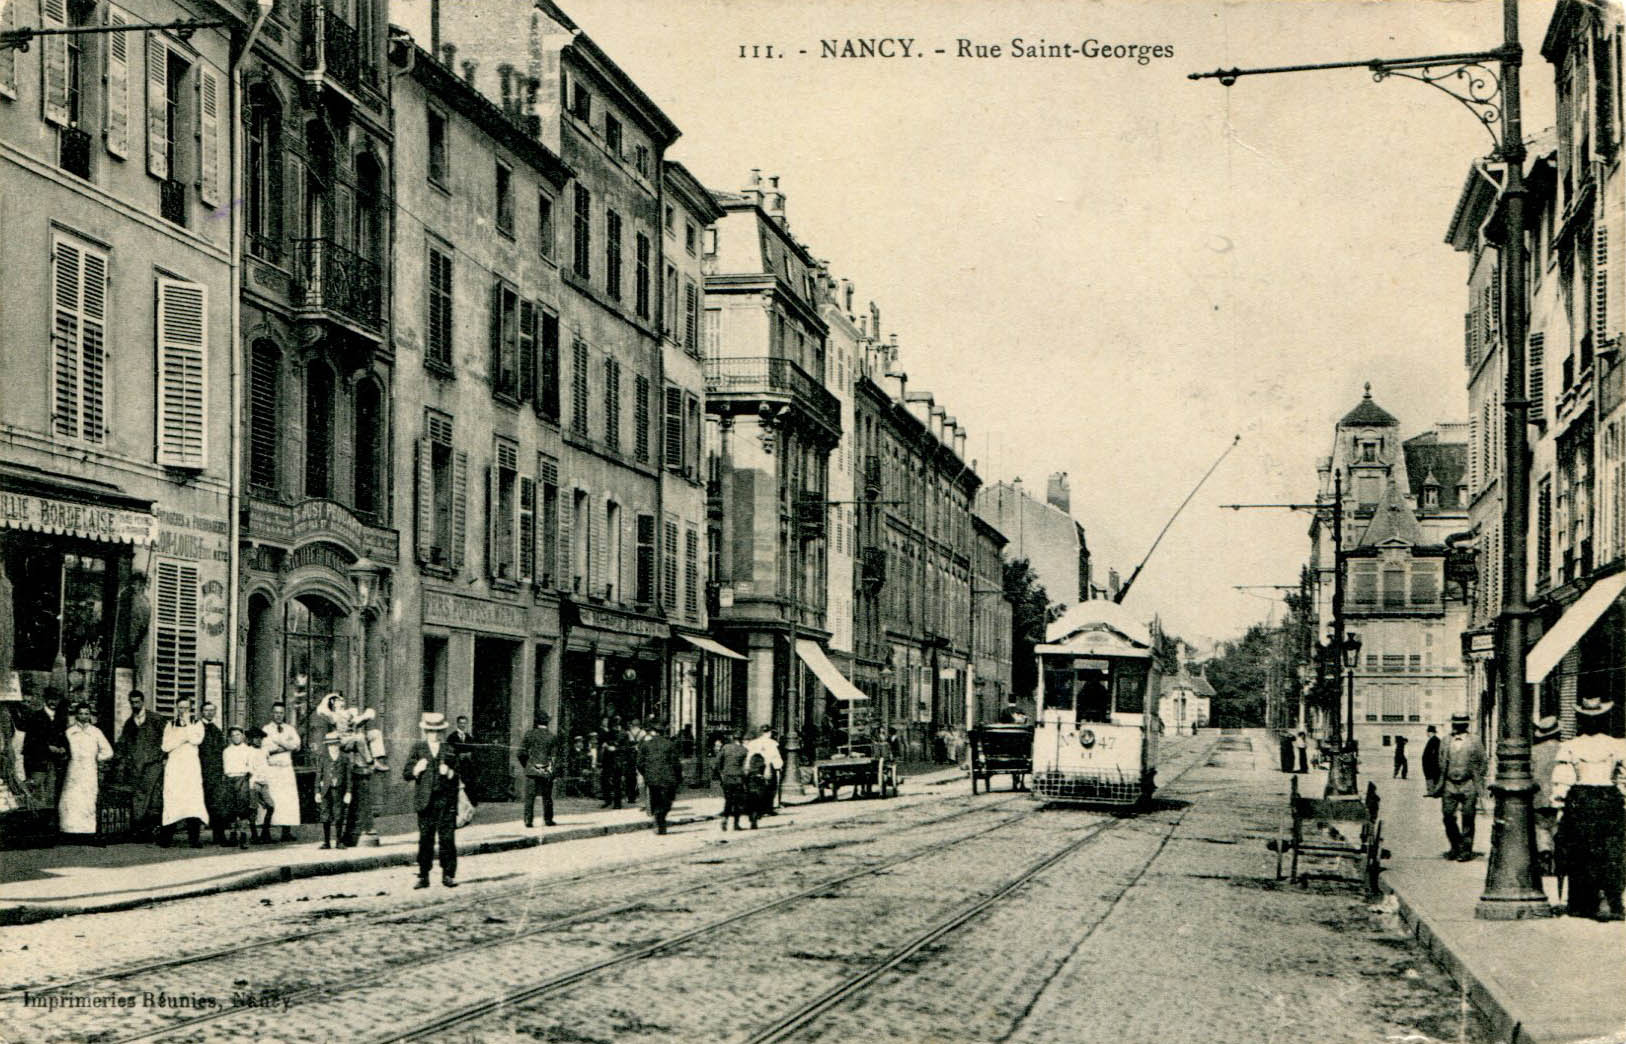 Rue St-Georges